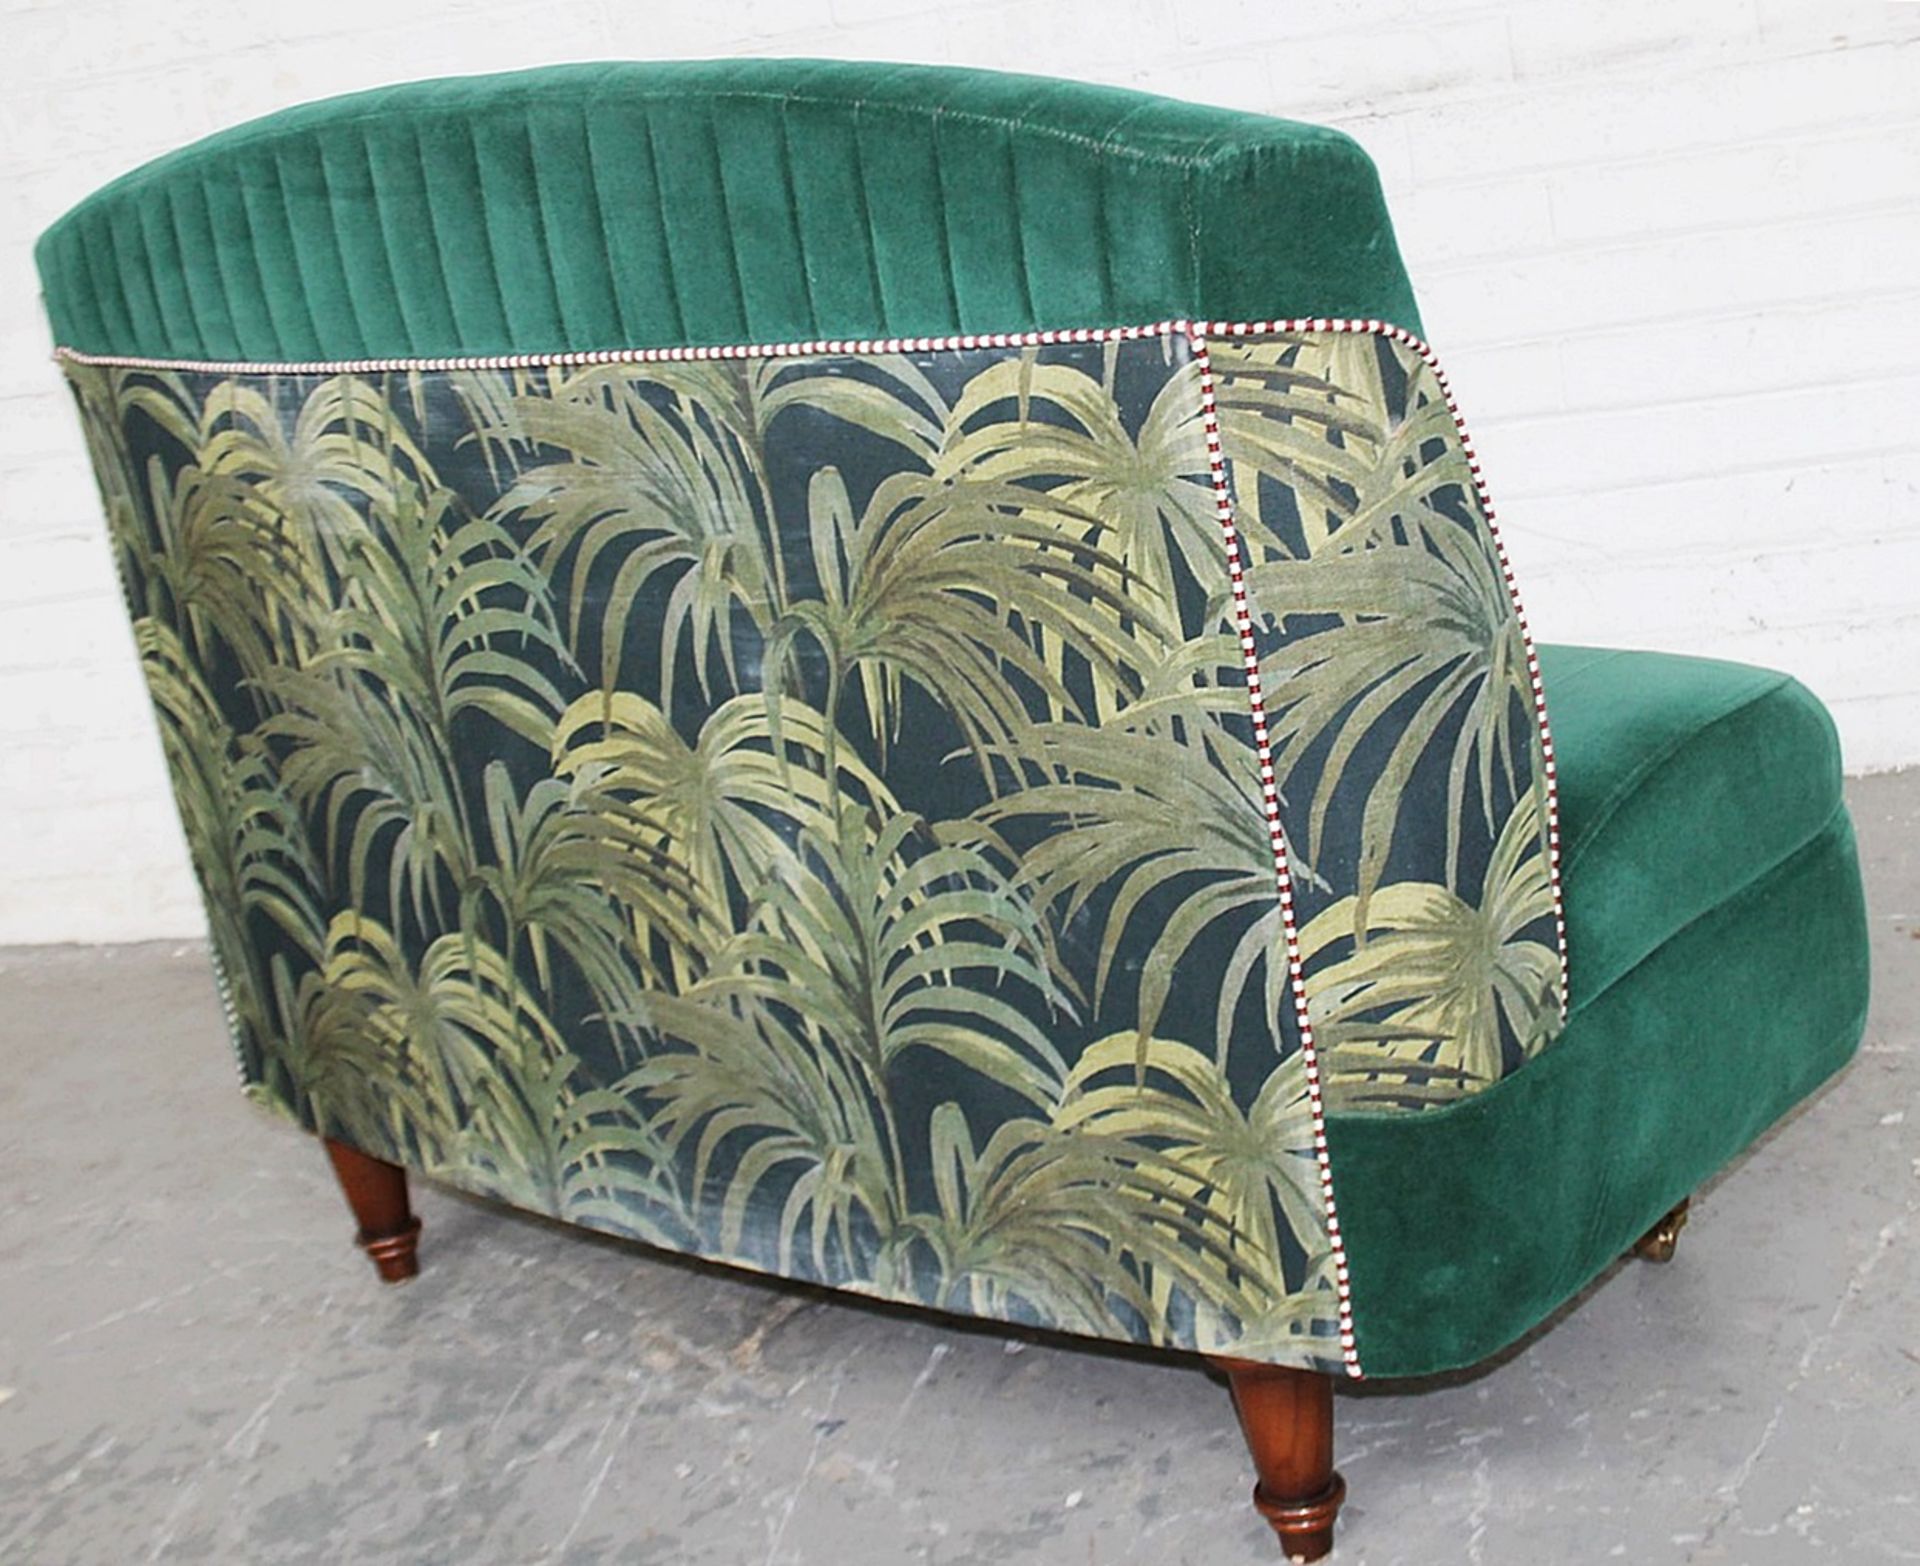 1 x Commercial Freestanding 2-Seater Booth Seating Sofa In A Deep Green Velvet With A Bespoke - Image 3 of 5